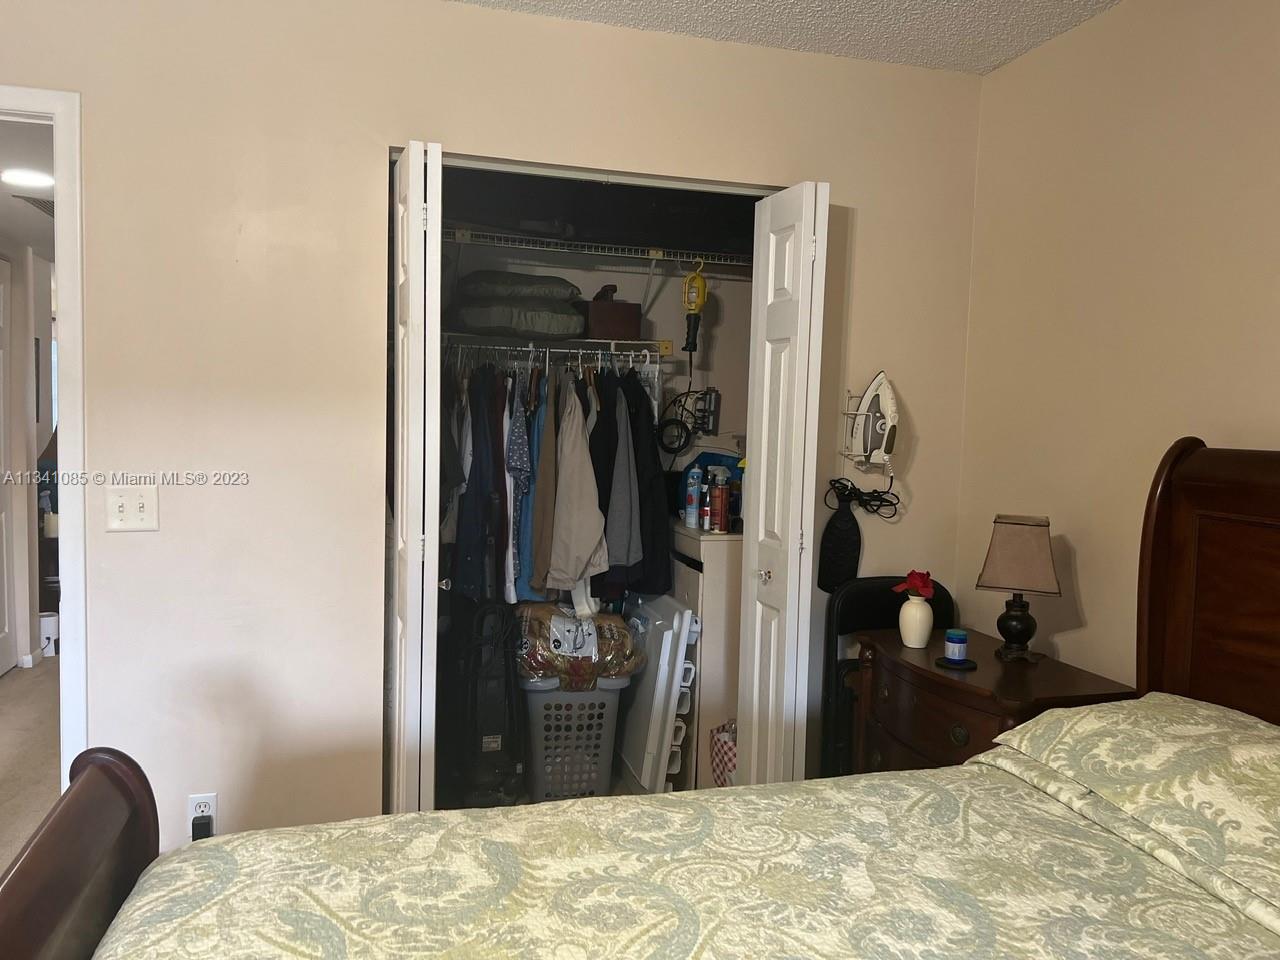 With a wall to wall deep closet